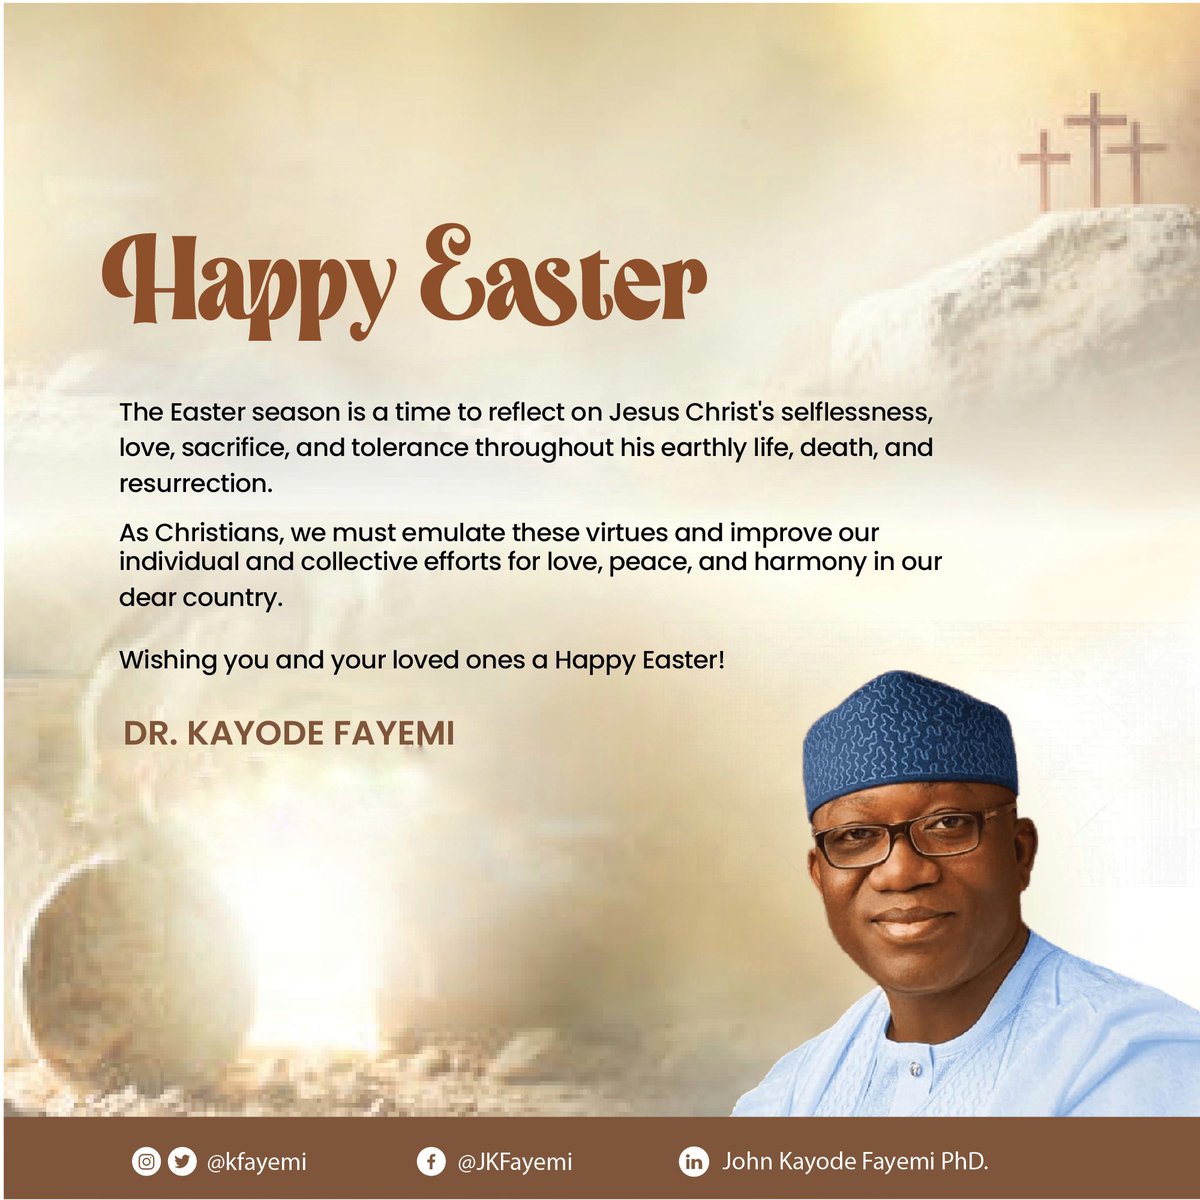 The Easter season is a time to reflect on Jesus Christ's selflessness, love, sacrifice, and tolerance throughout his earthly life, death, and resurrection. As Christians, we must emulate these virtues and improve our individual and collective efforts for love, peace, and harmony…